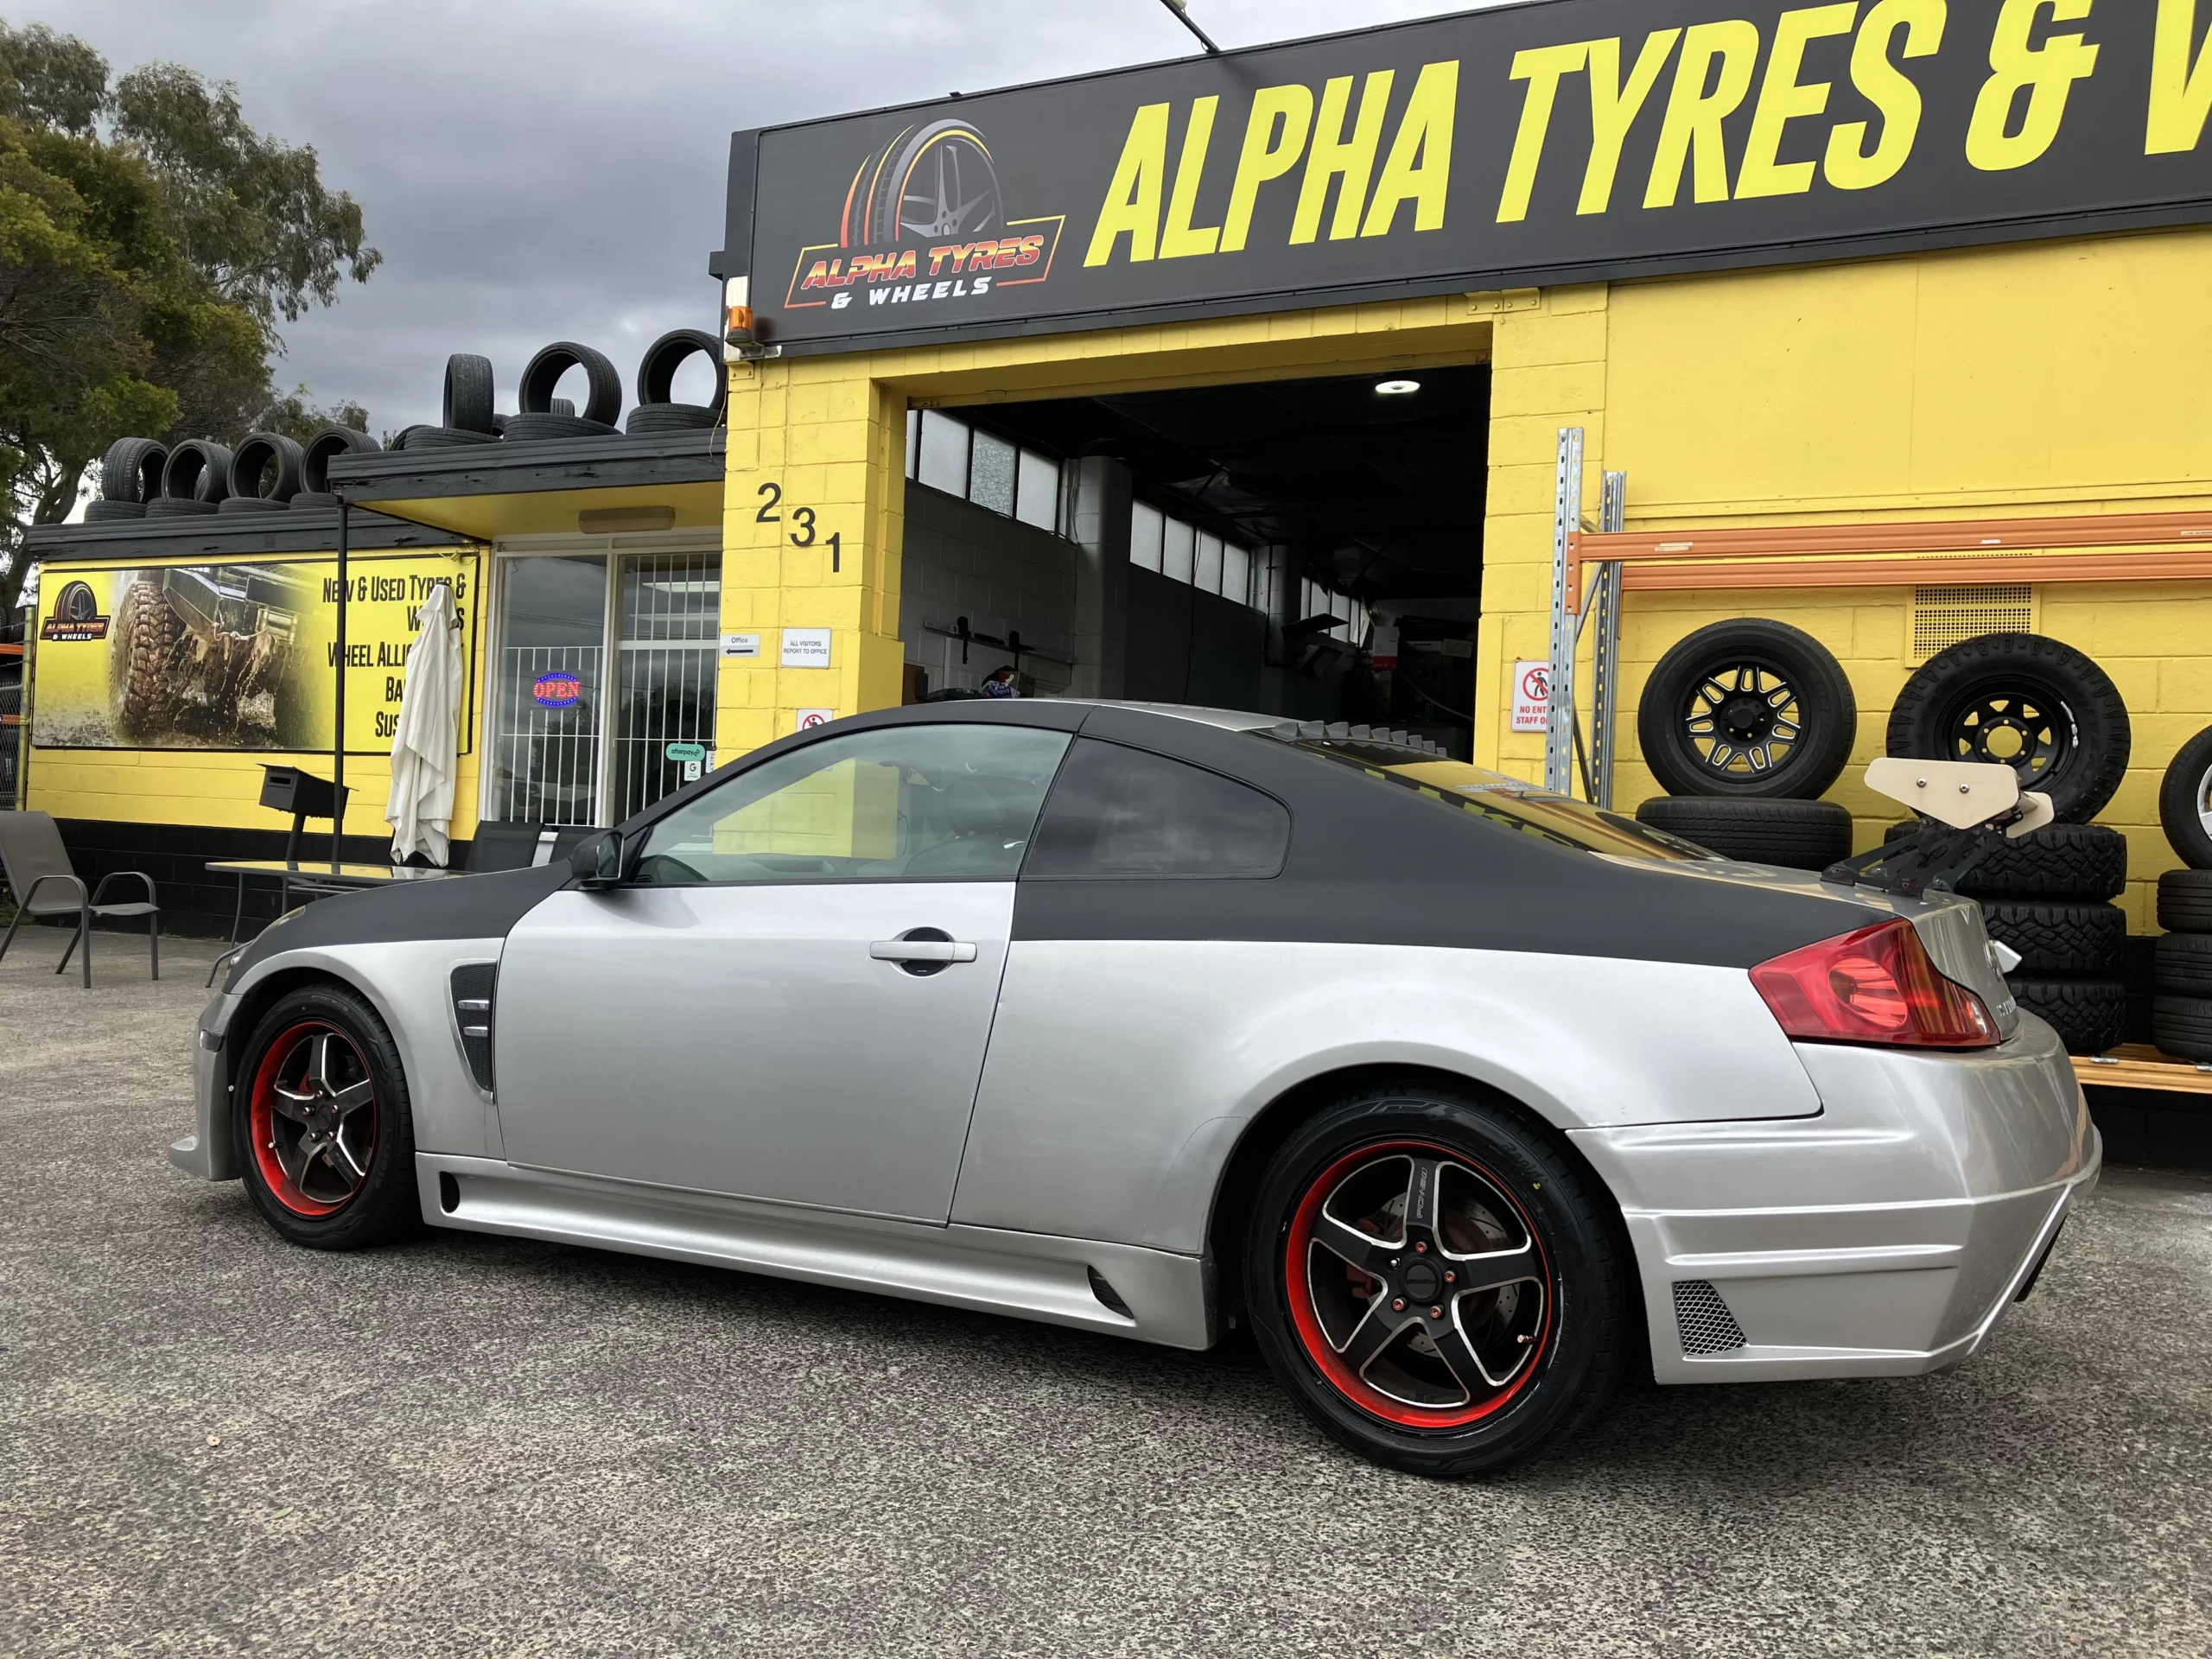 Alpha tyres and wheels tyre shop in lilsyth